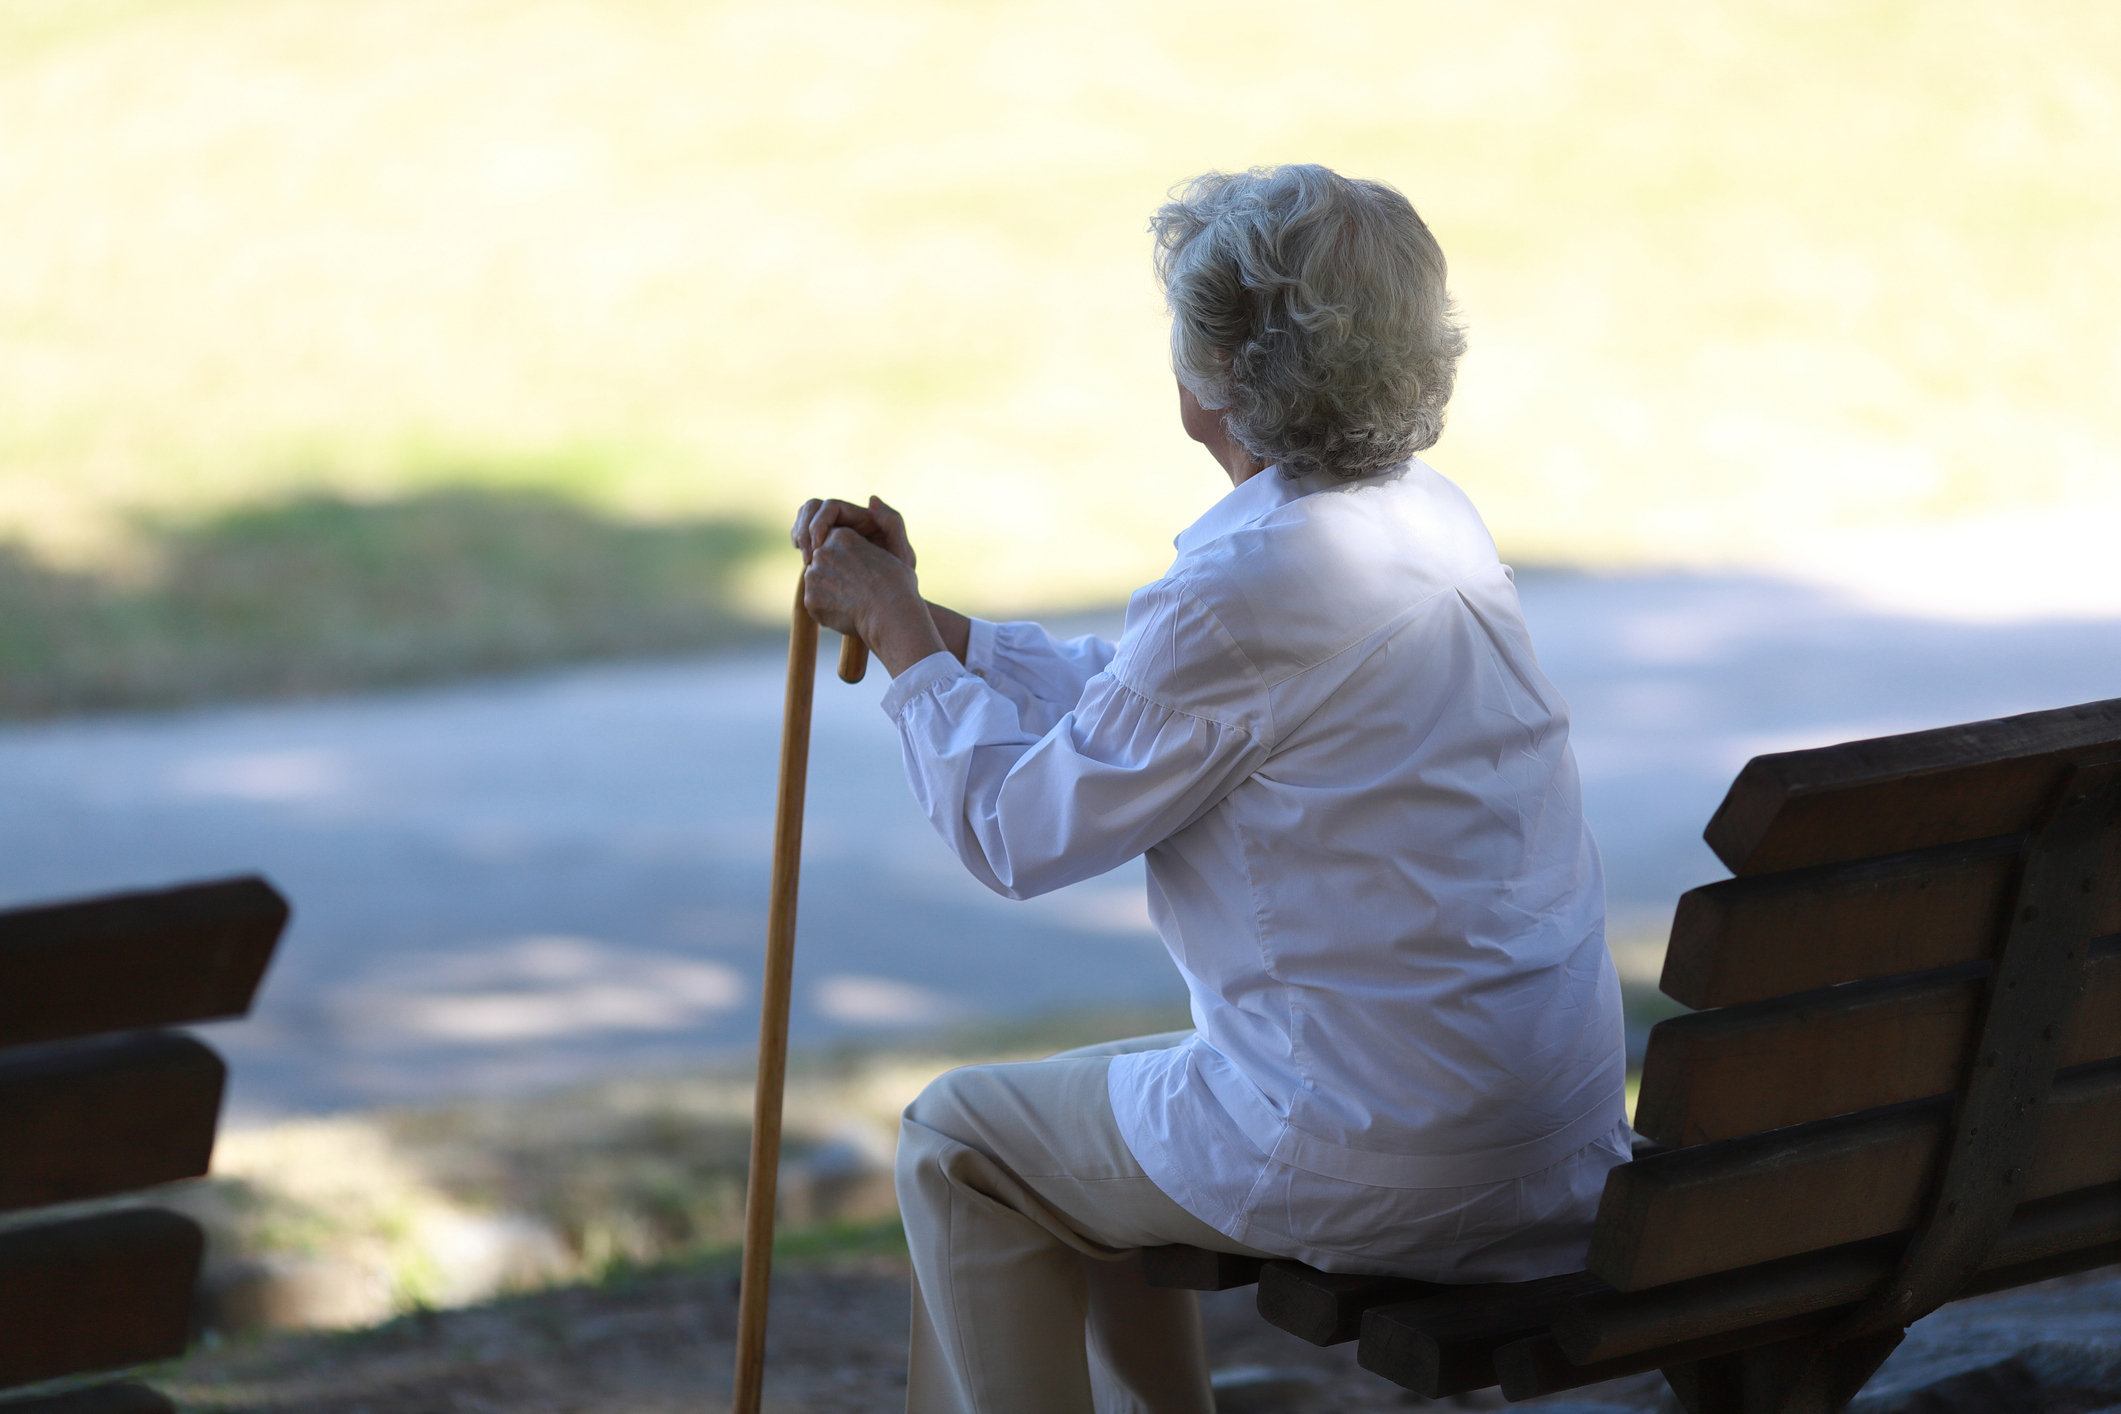 Elderly person sitting on a park bench, holding a cane, viewed from behind, in a contemplative pose